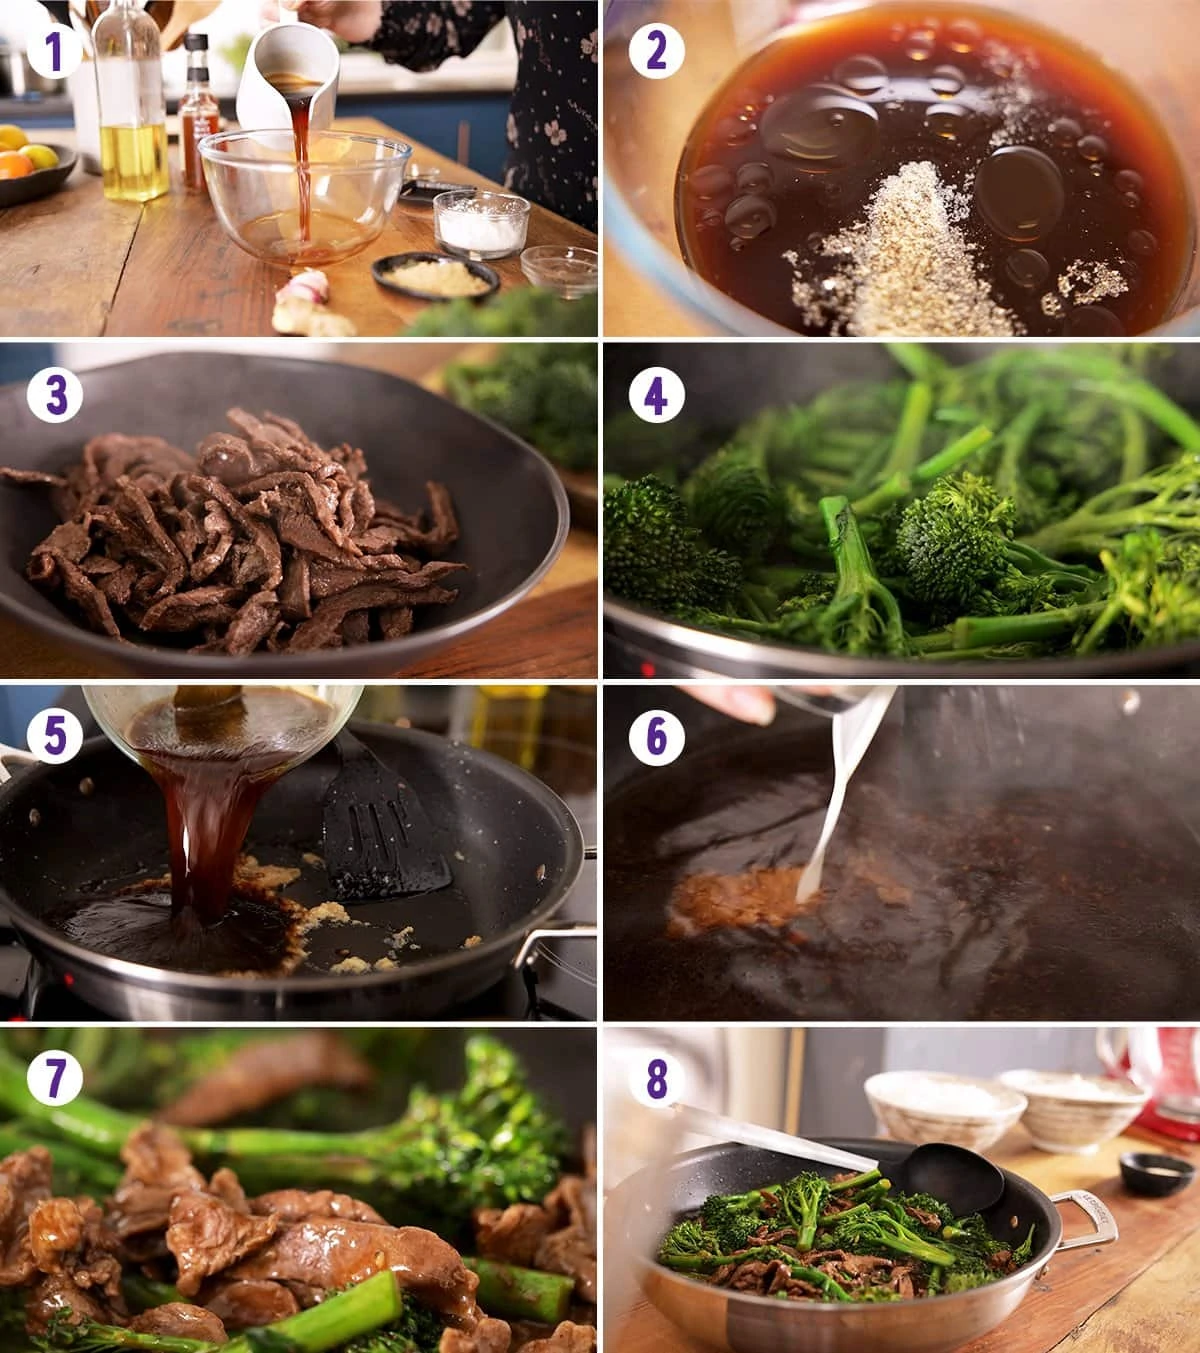 8 image collage showing how to make beef and broccoli